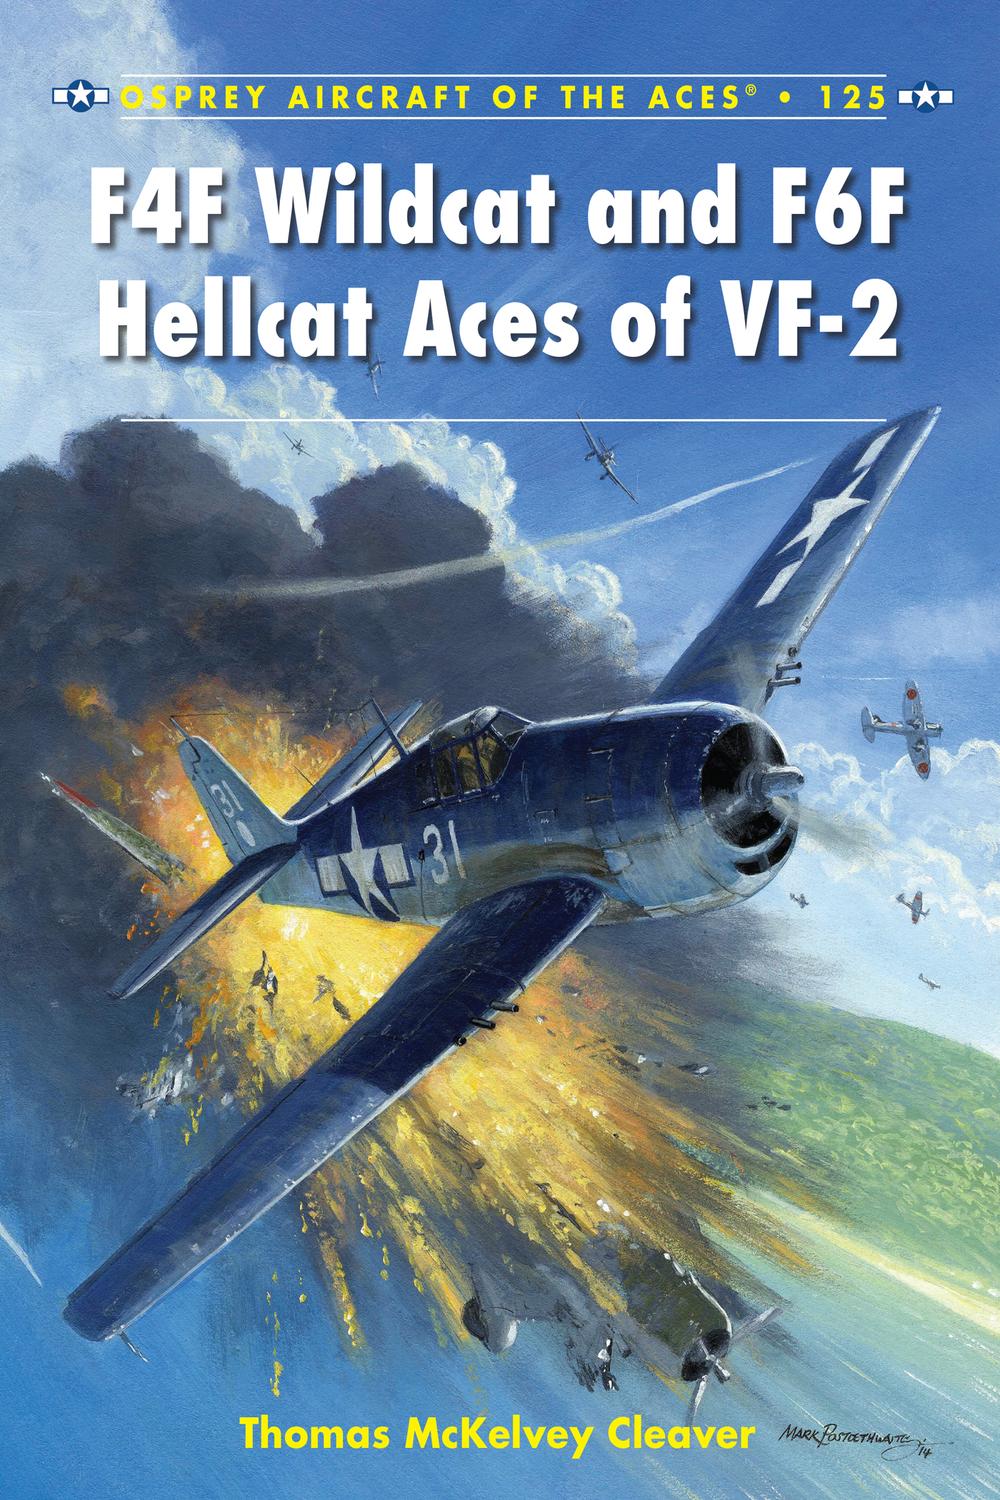 F4F Wildcat and F6F Hellcat Aces of VF-2 - Thomas McKelvey Cleaver, Jim Laurier, Mark Postlethwaite